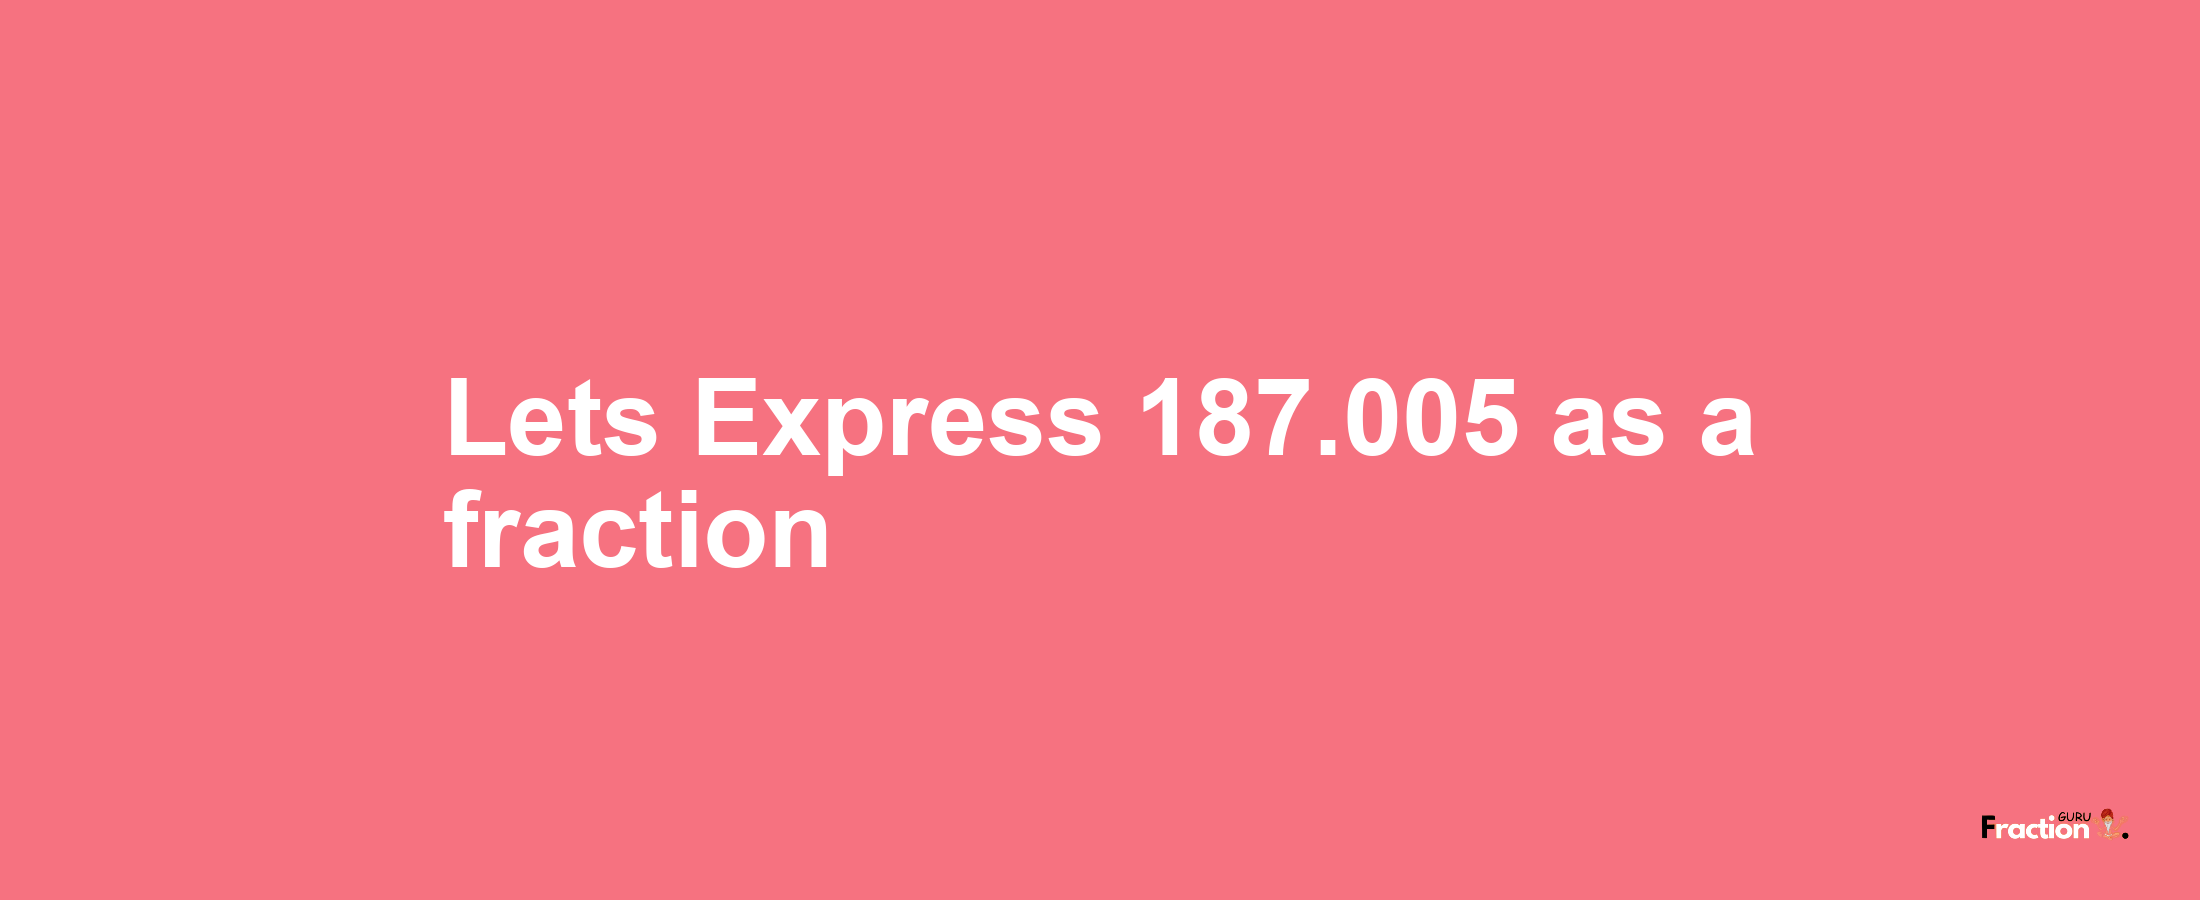 Lets Express 187.005 as afraction